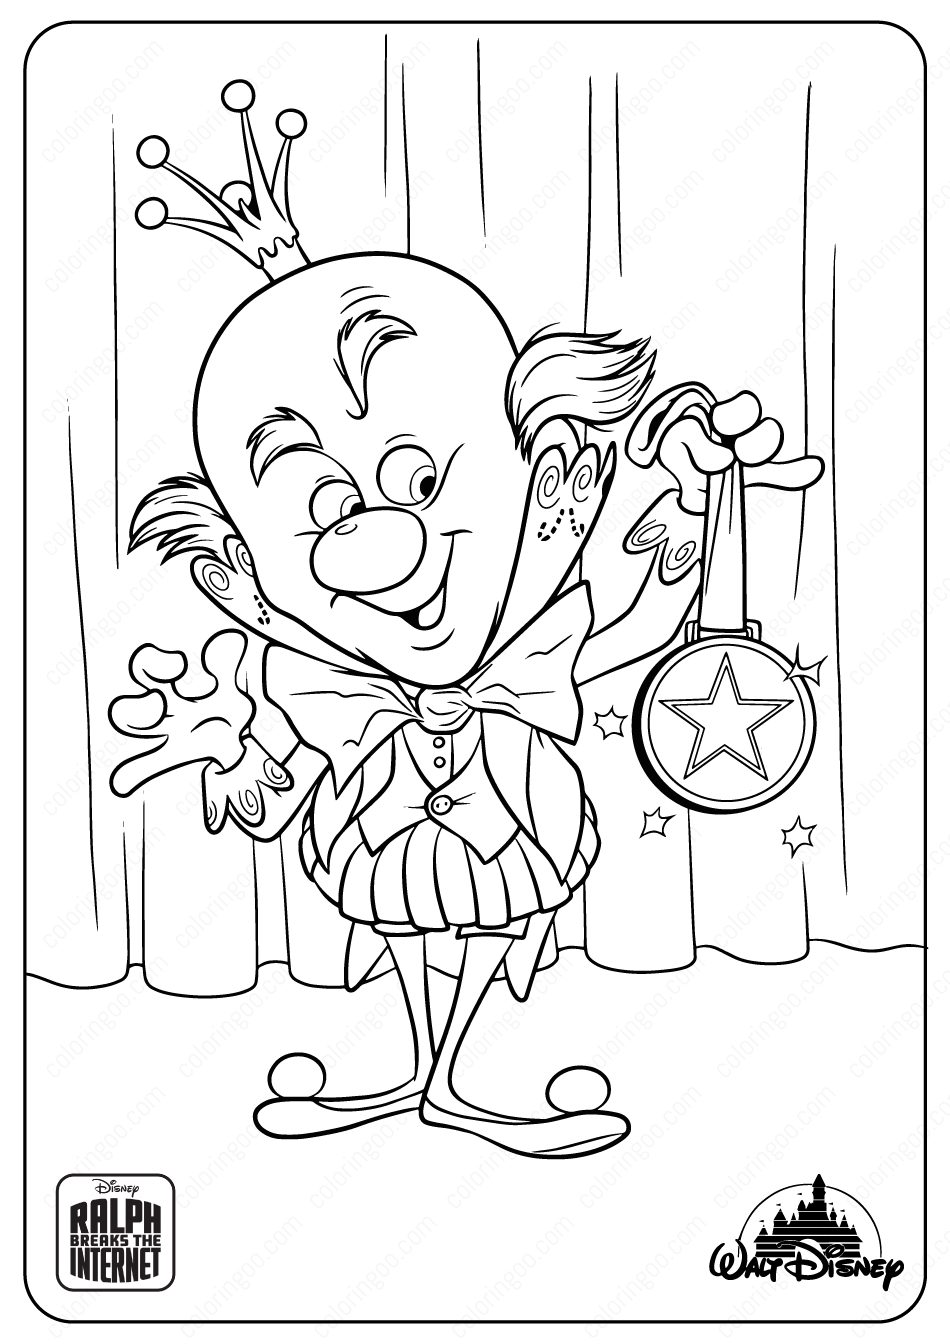 disney ralph breaks the internet king candy coloring pages